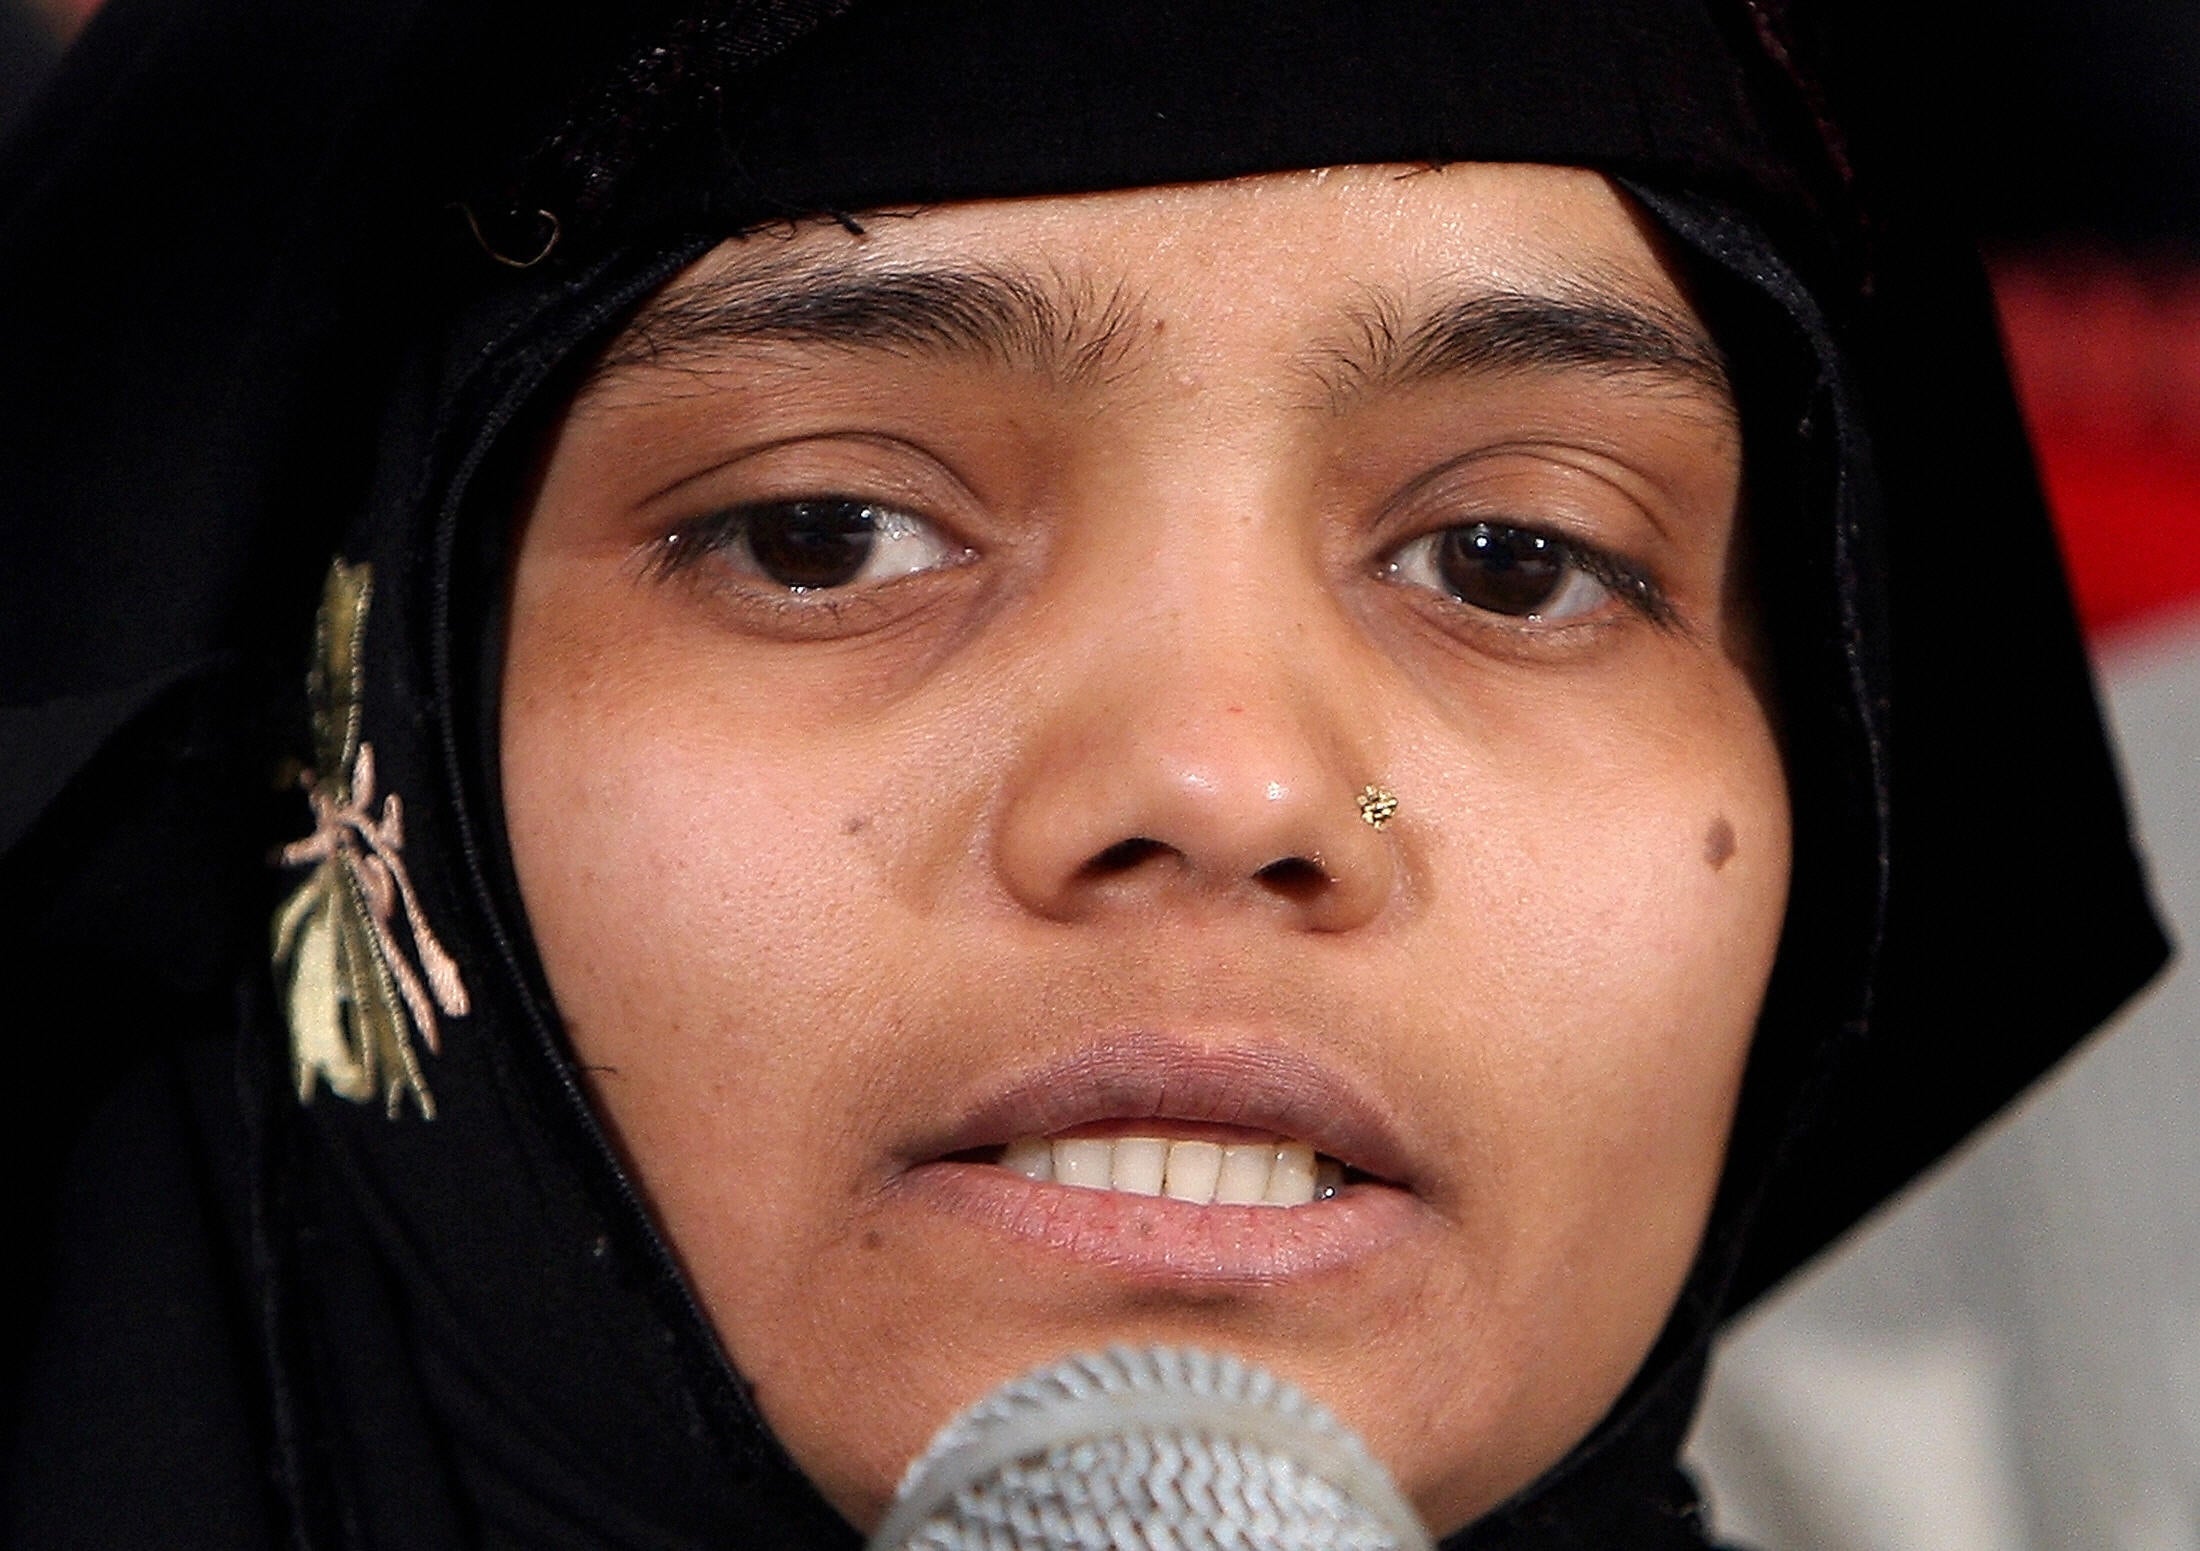 File photo: Bilkis Bano, a housewife who was gang-raped during the 2002 Gujarat riots, addresses a media conference in New Delhi on 21 January 2008